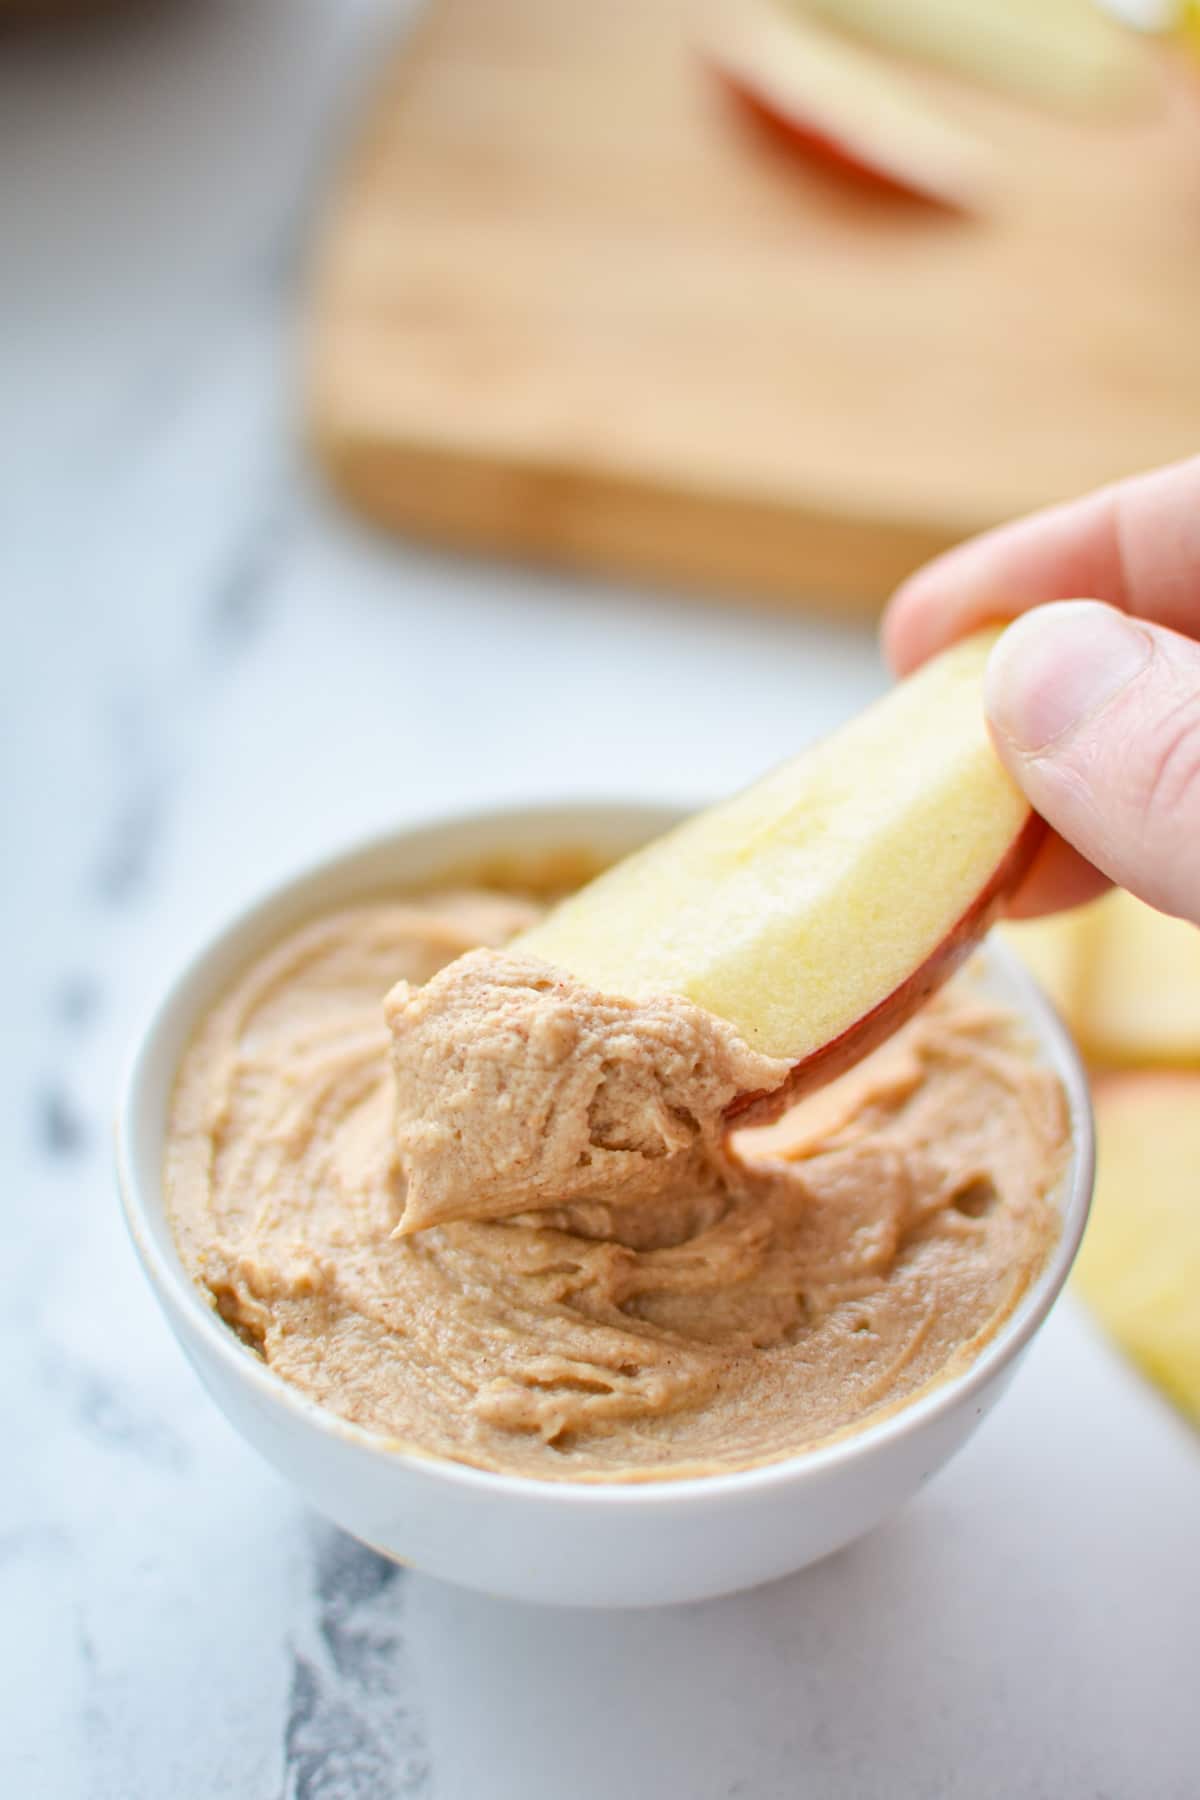 Dipping an apple slice into a peanut butter yogurt dip, with a cutting board in the background.